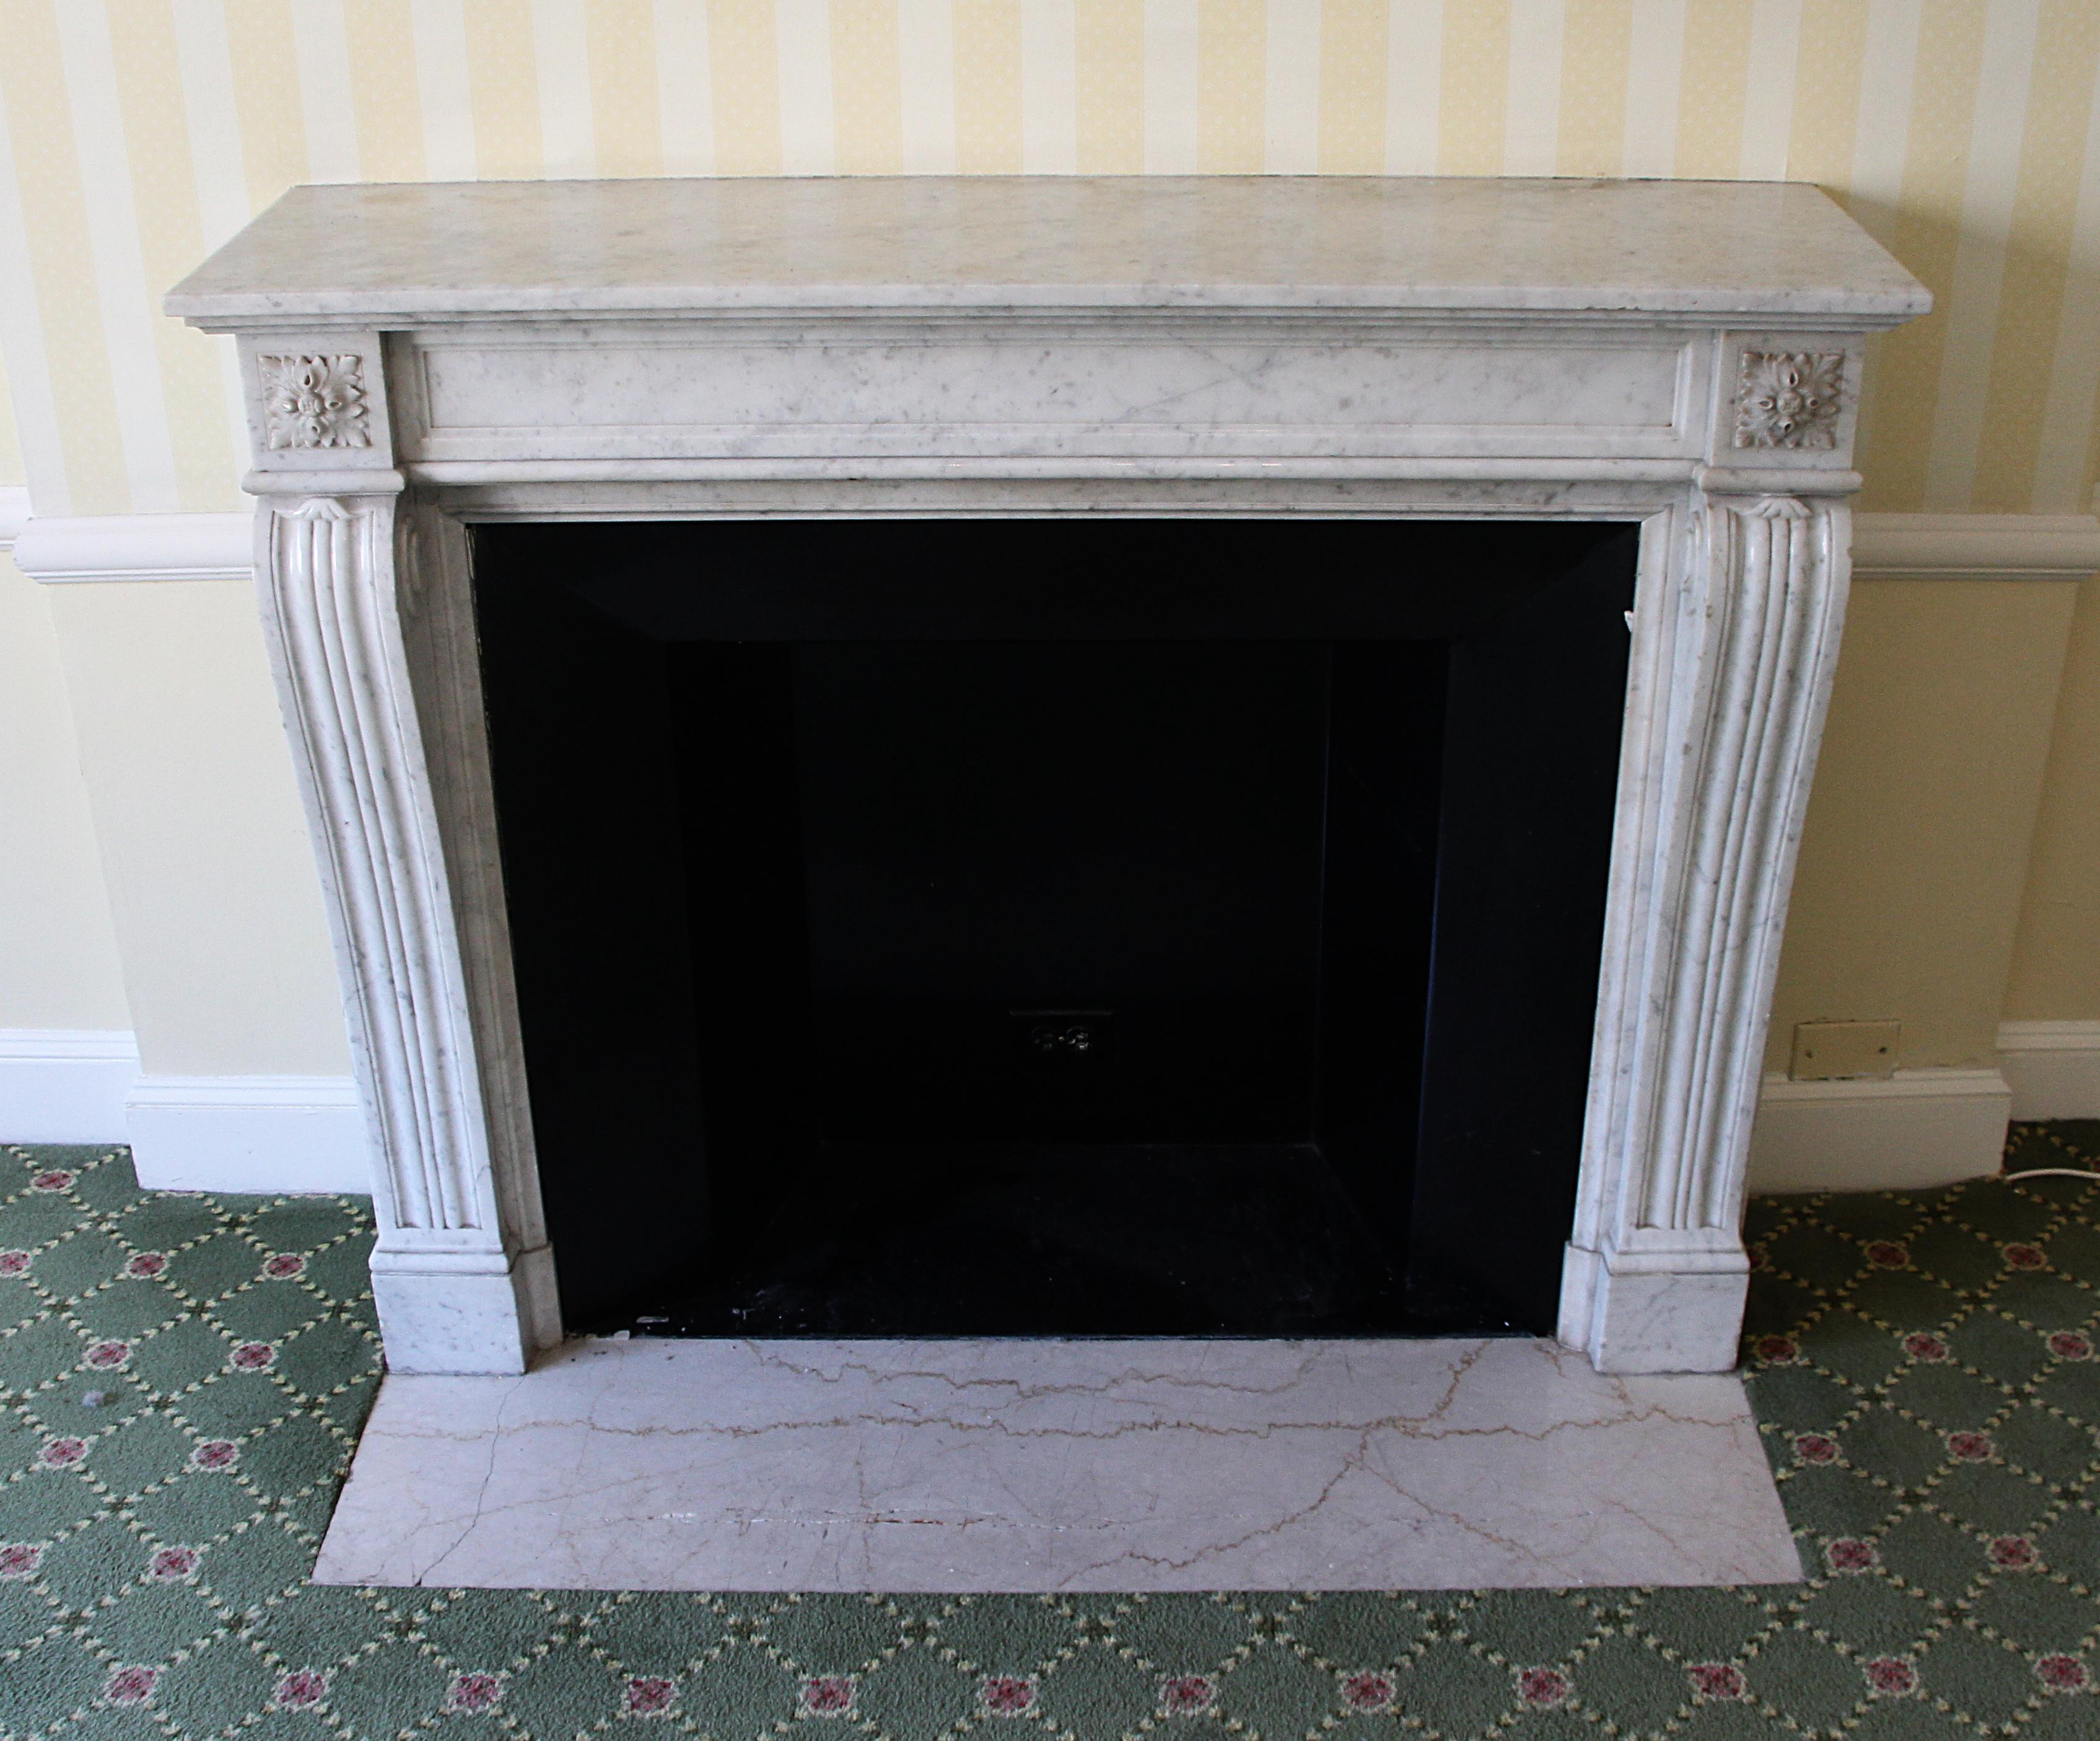 Louis XVI Regency Carrara white and gray marble mantel with rosette detail on the upper corners. Also fluted legs with slight protrusion at the top and scroll on the side. This was imported from France and installed in the Waldorf Astoria hotel in